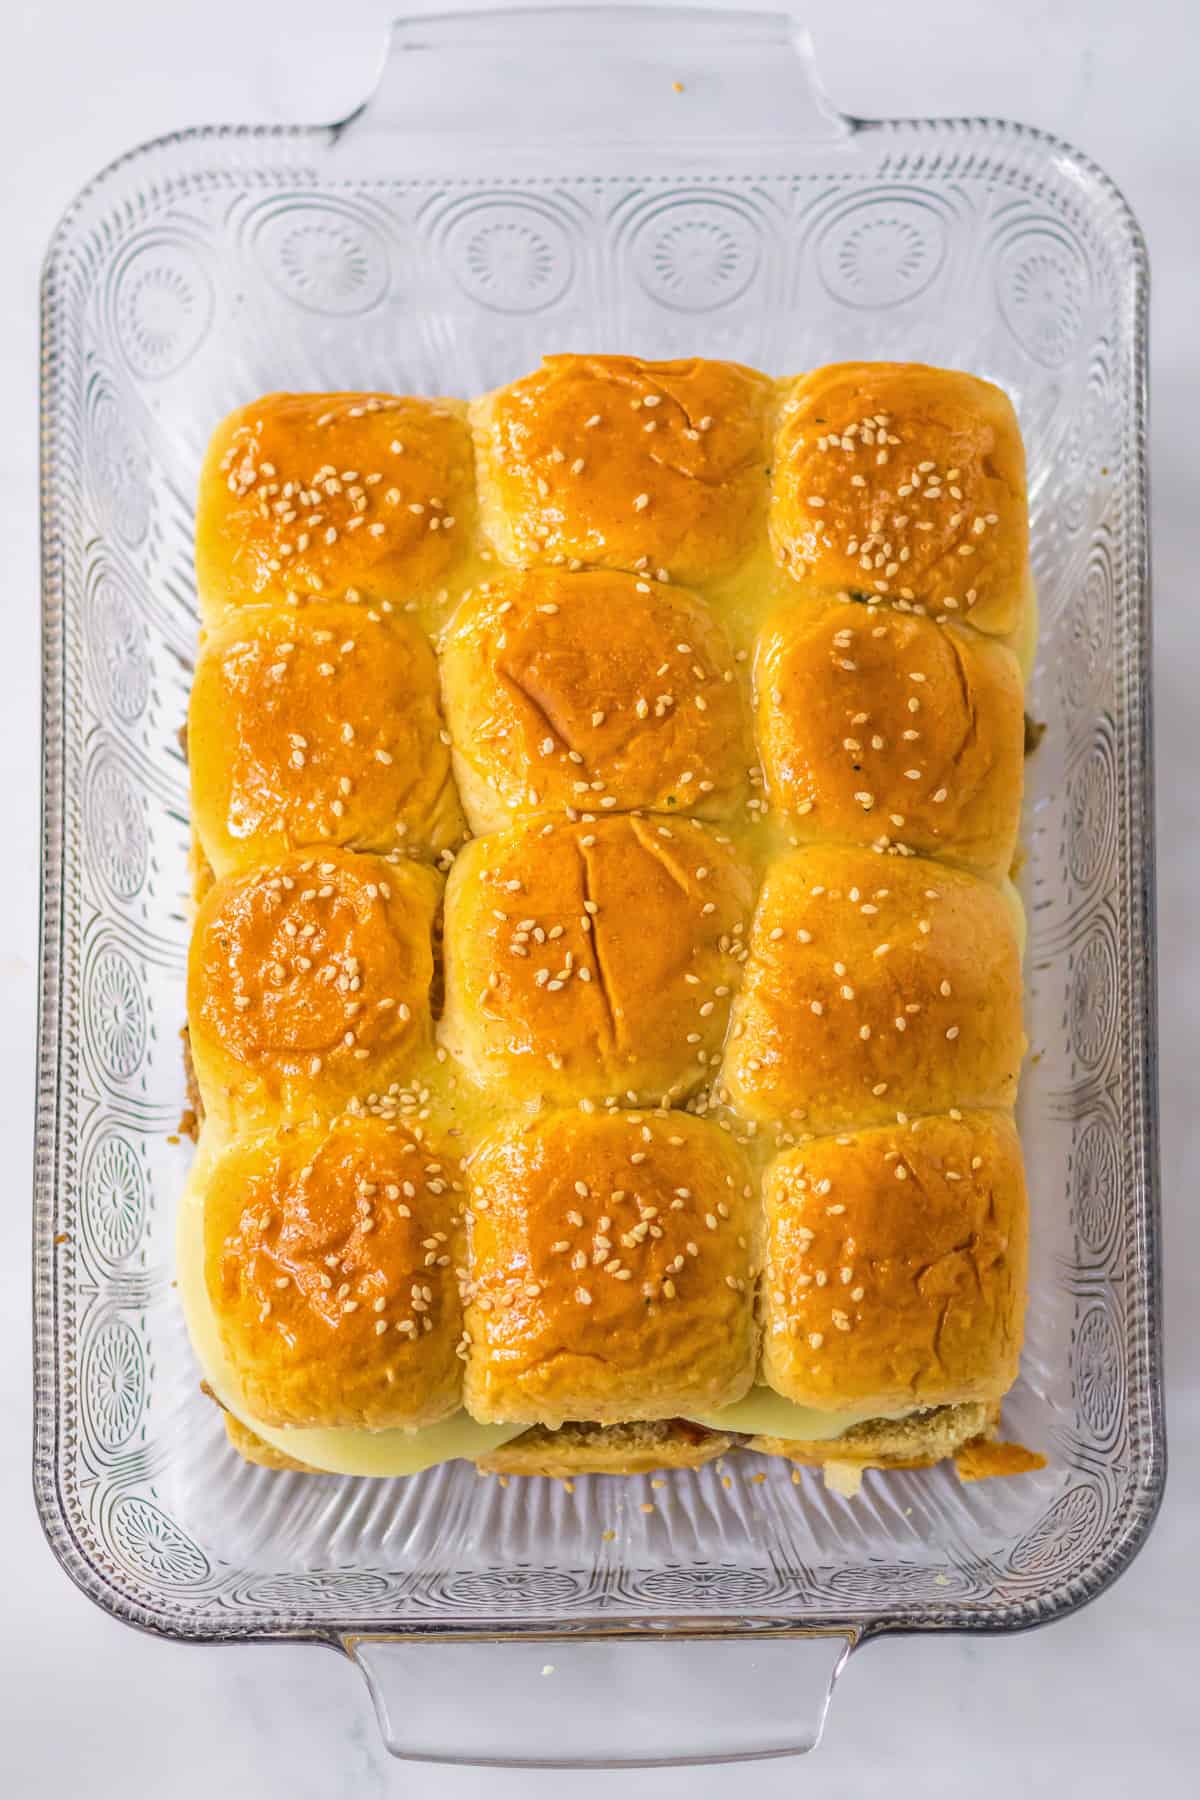 Slider buns with sesame seeds in 9 x 13 casserole dish.